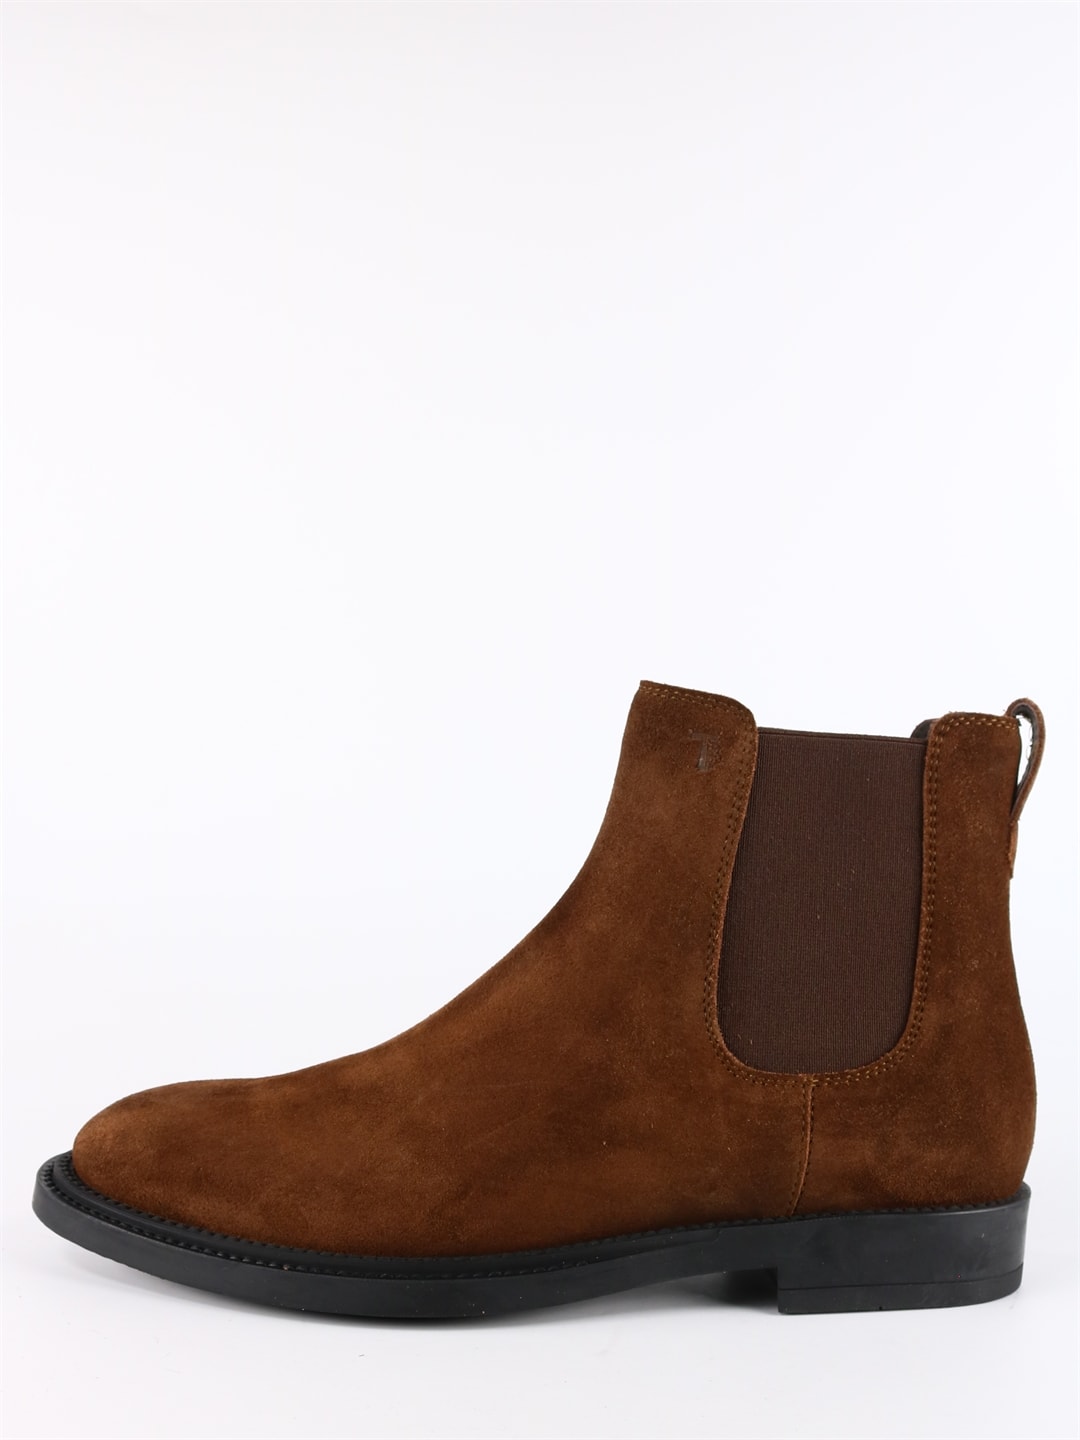 Tods Chelsea Boots Brown Suede